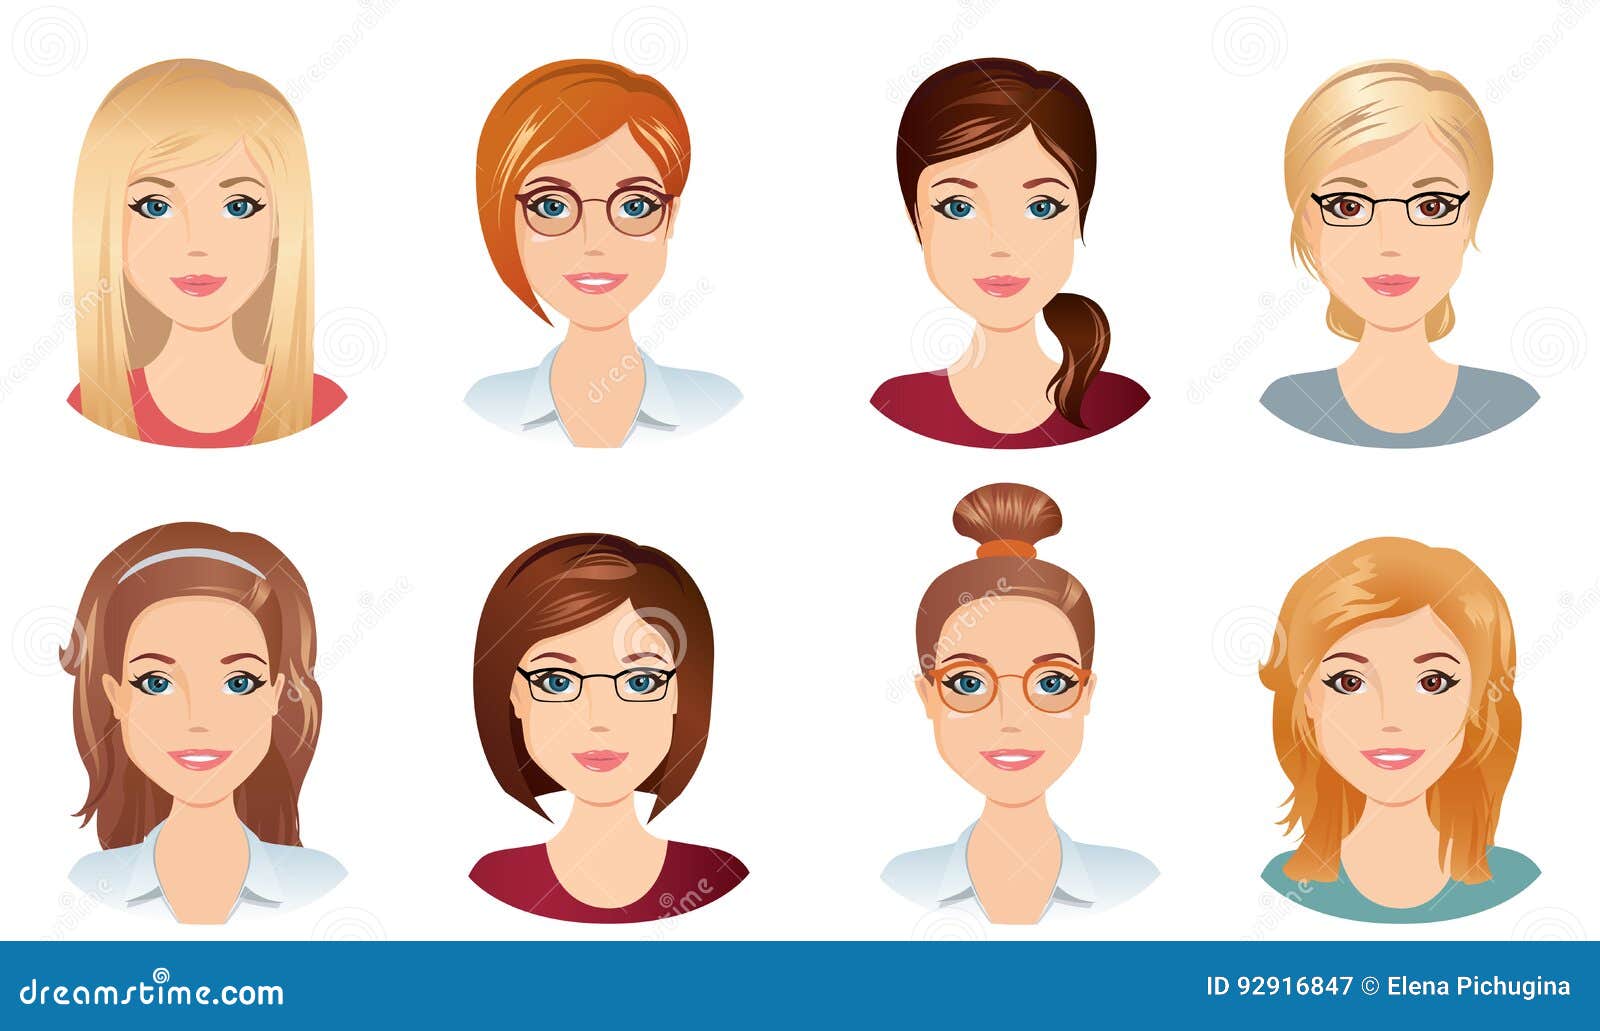 Cute Women With Different Hairstyles Stock Vector